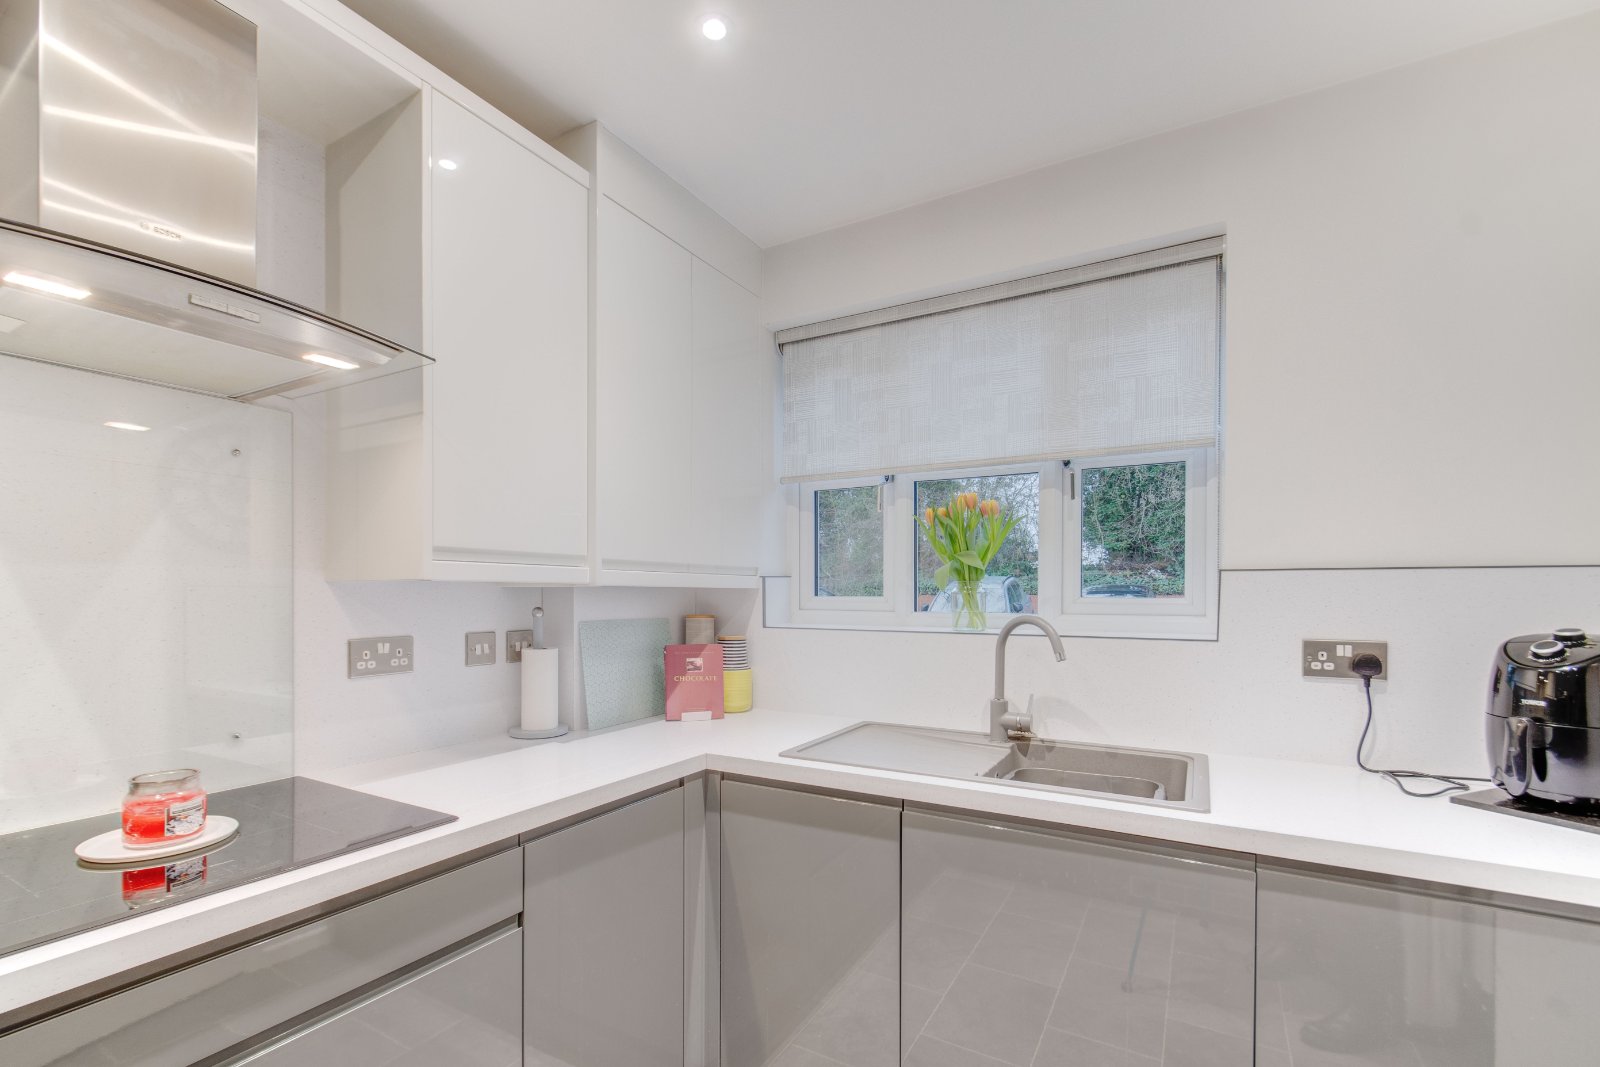 2 bed house for sale in Minworth Close, Redditch 3